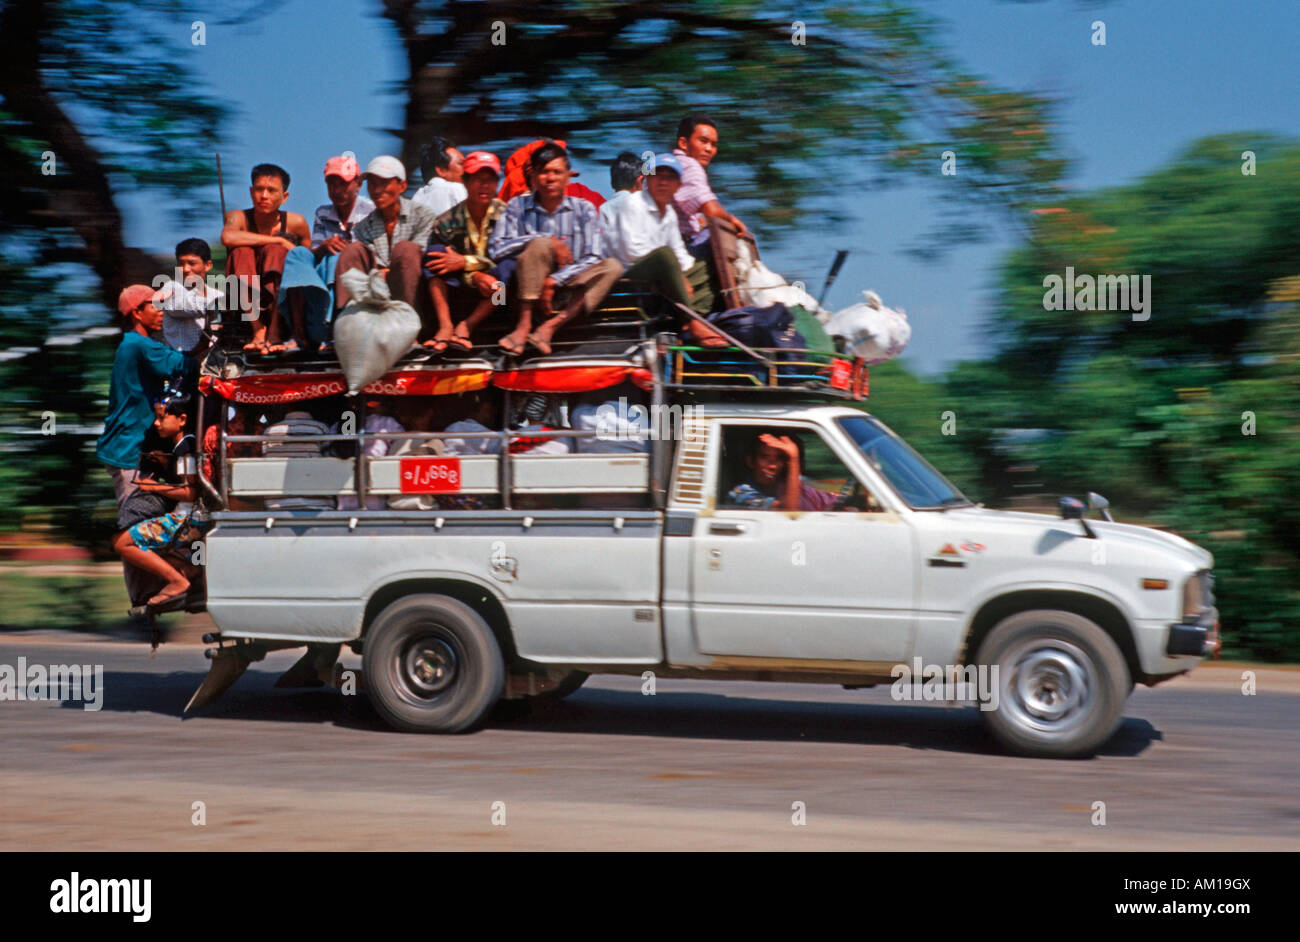 Overcrowded car, people on the roof, Burma, Asia Stock Photo